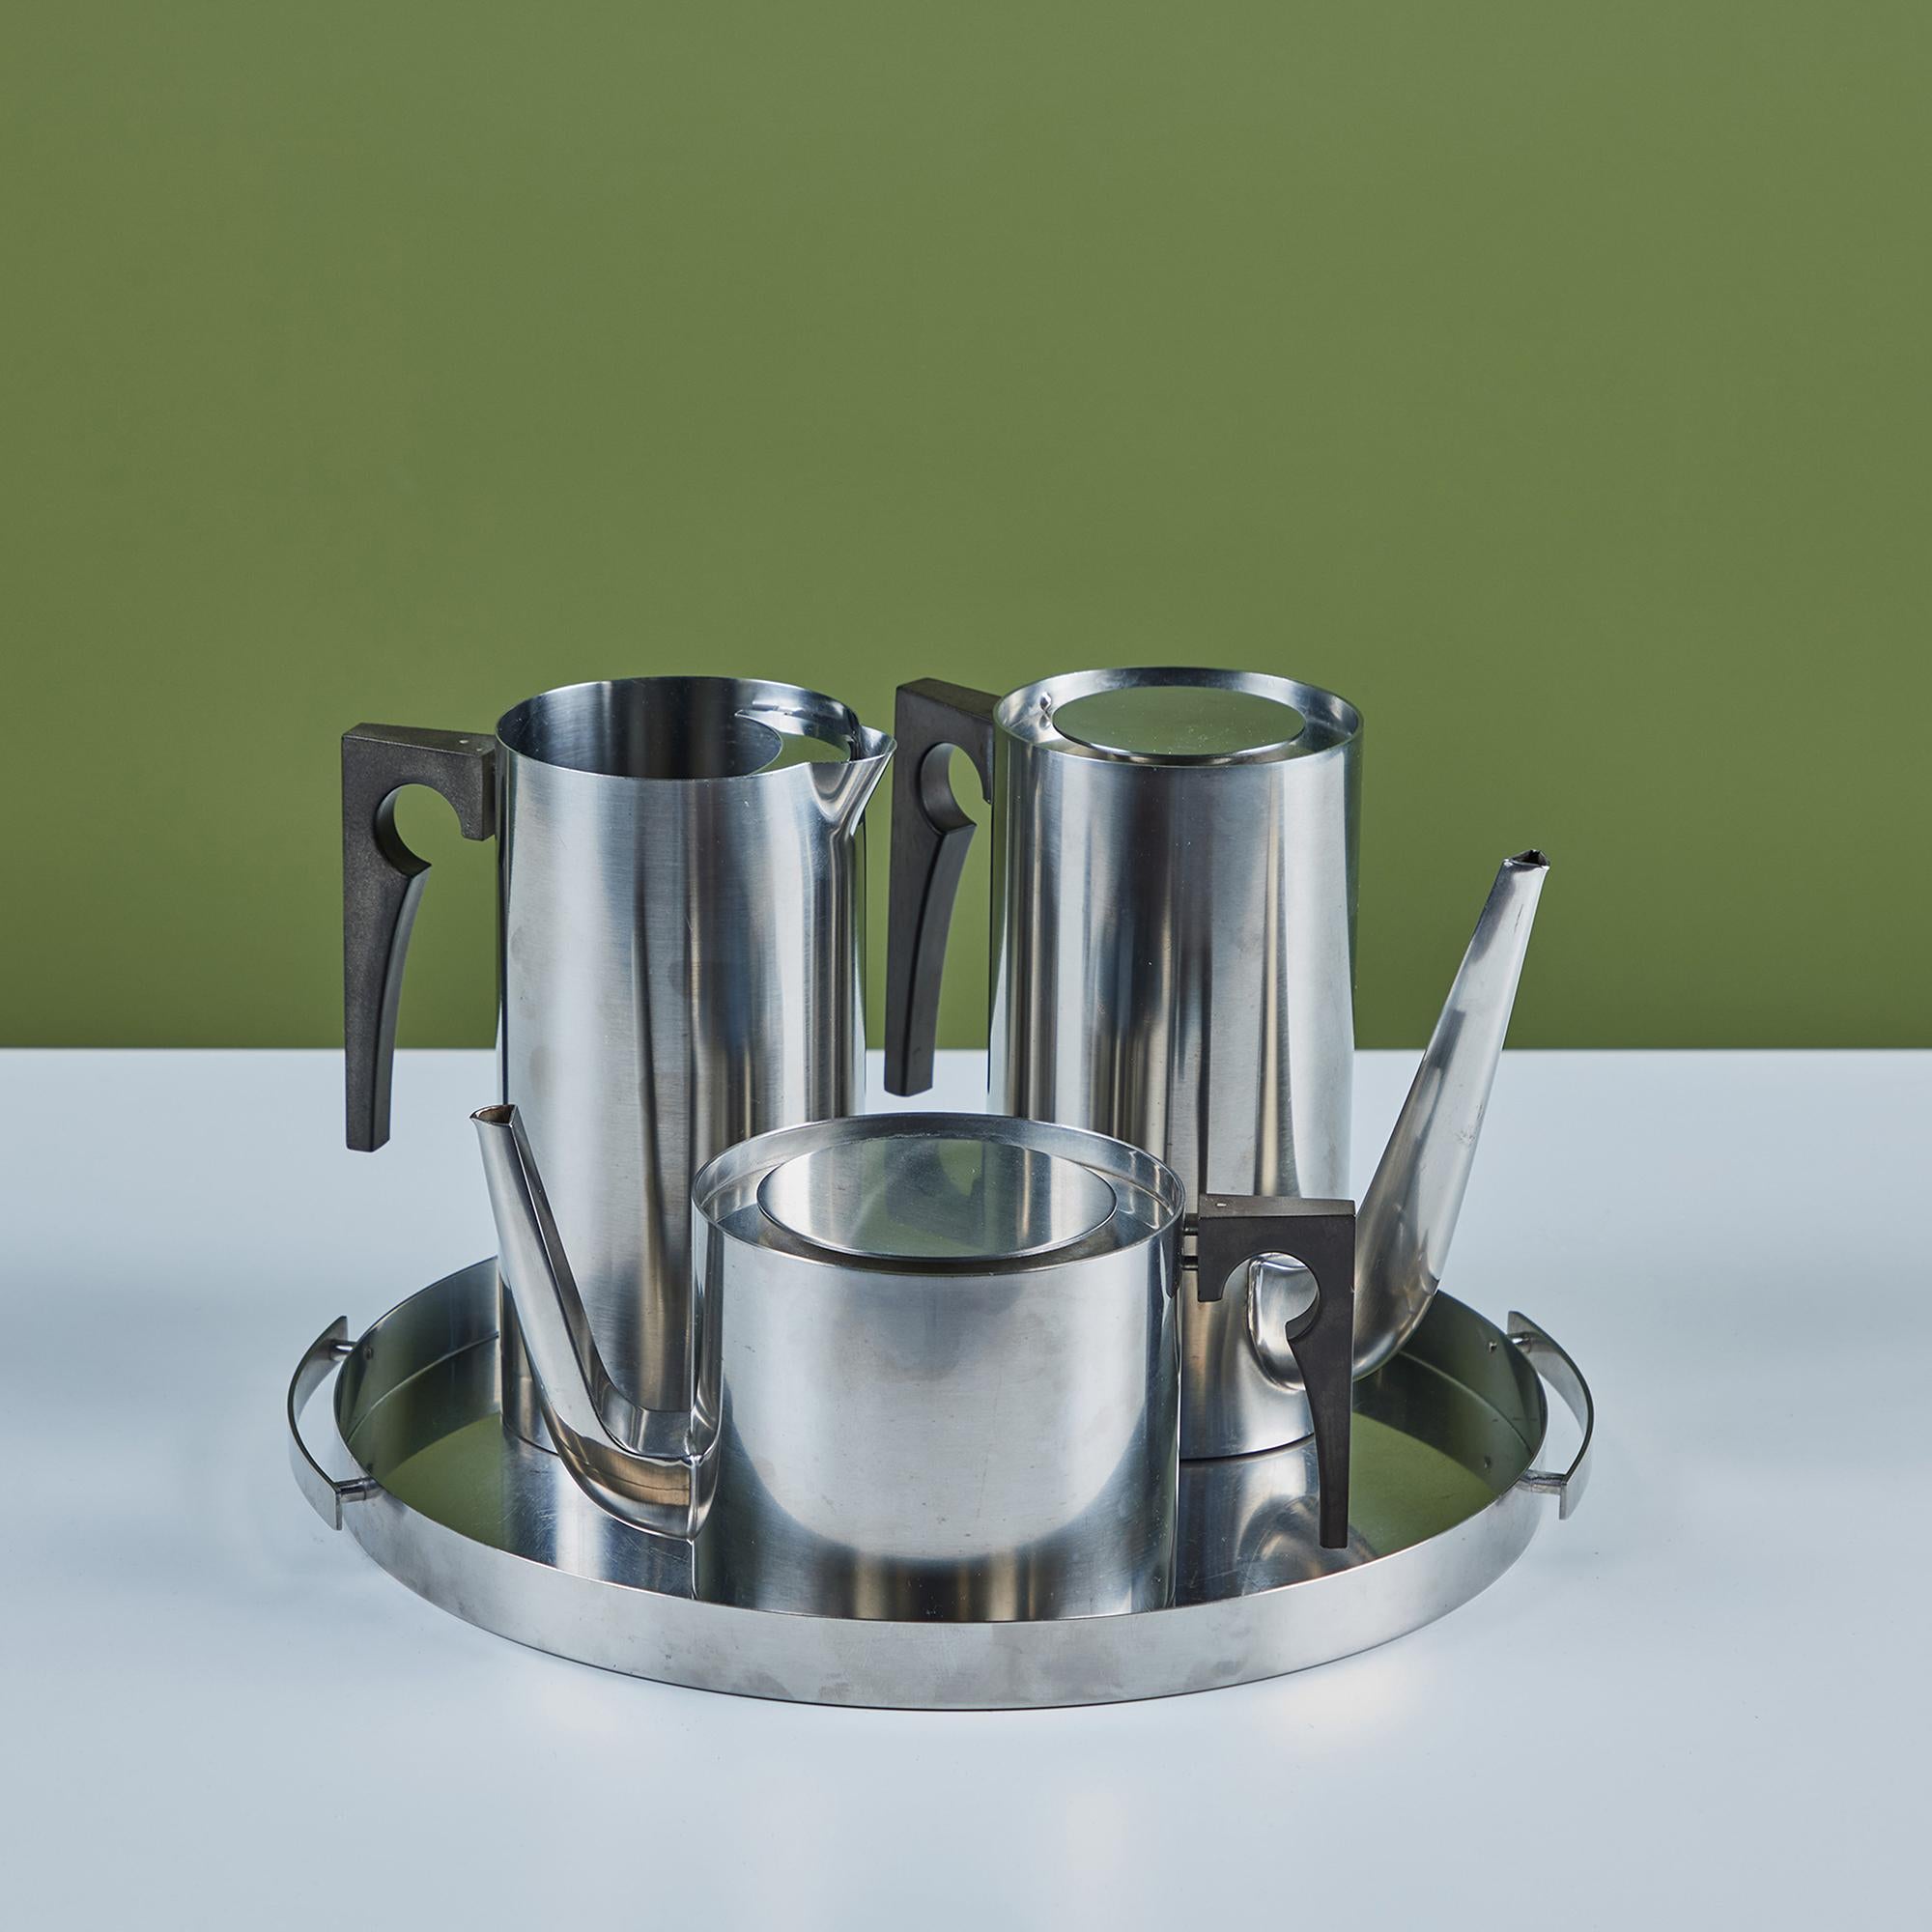 Four-piece stainless steel coffee and tea service set by Arne Jacobsen for Stelton, c.1960s, Denmark. The set includes a coffee pot, tea pot, pitcher and round rimmed tray with handles.
Stelton imprinted on the underside.

Dimensions
Coffee Pot: 9